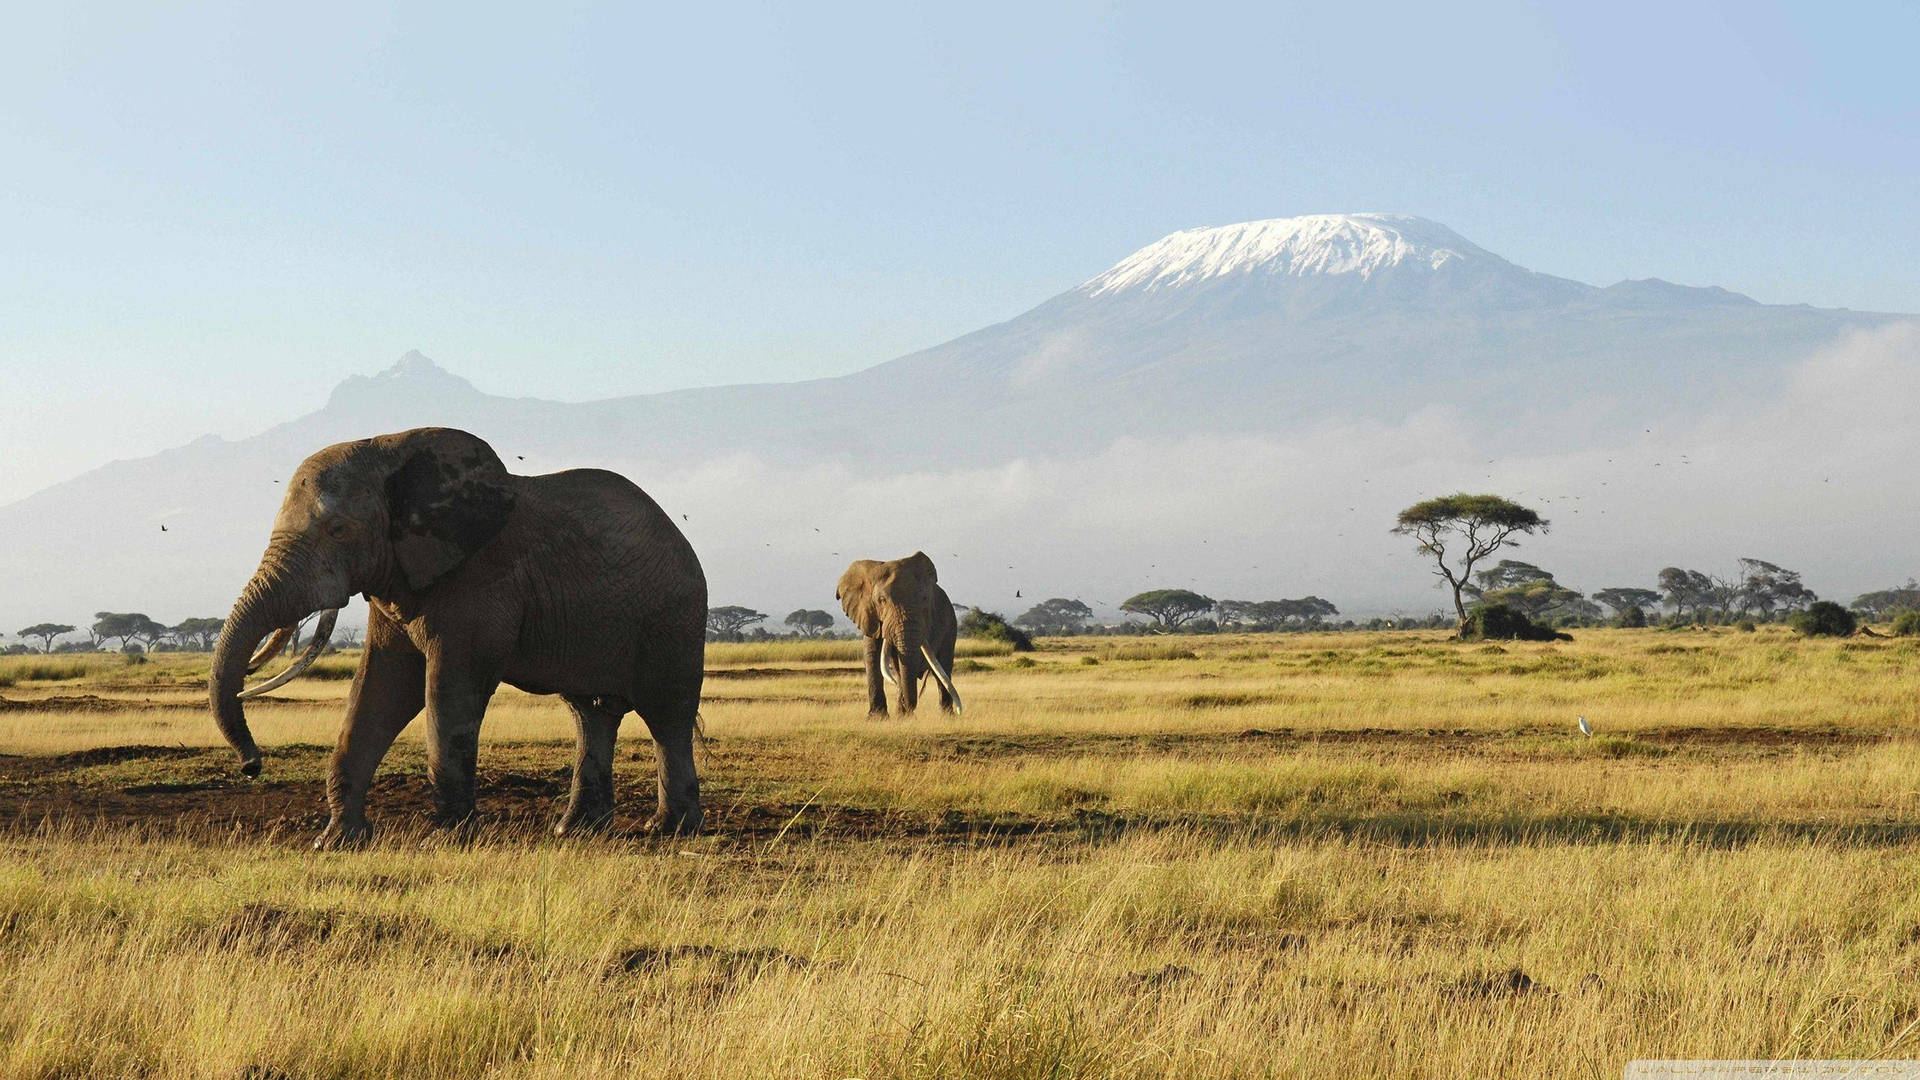 Elephant And Mountains In Africa Picture